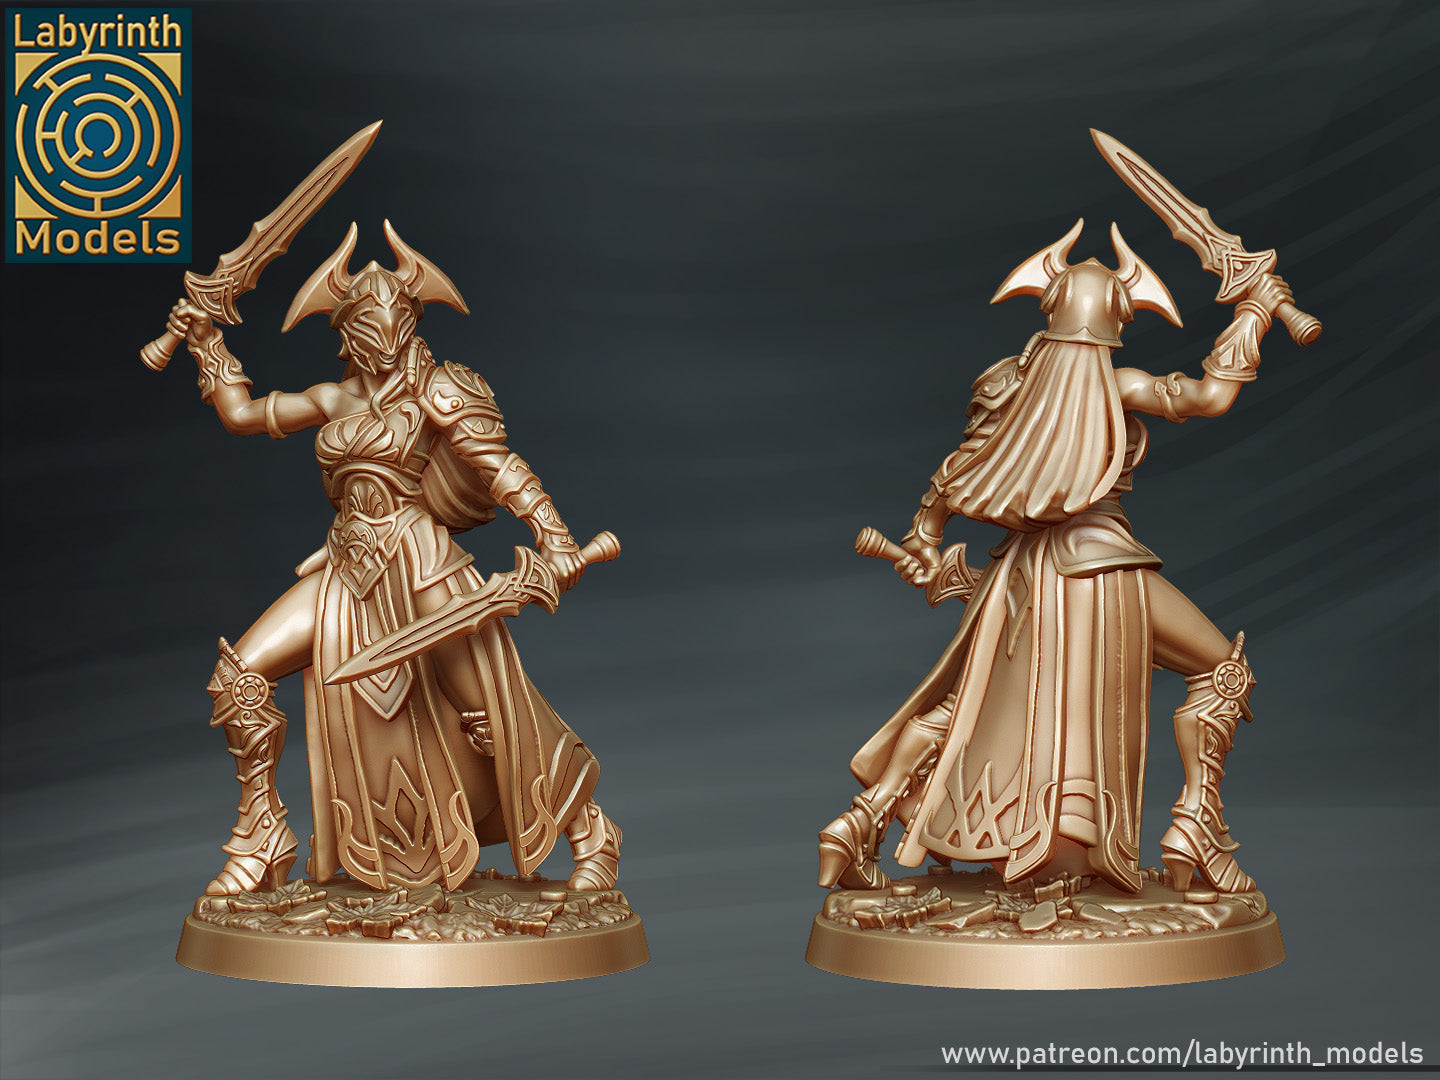 Furies by Labyrinth Models